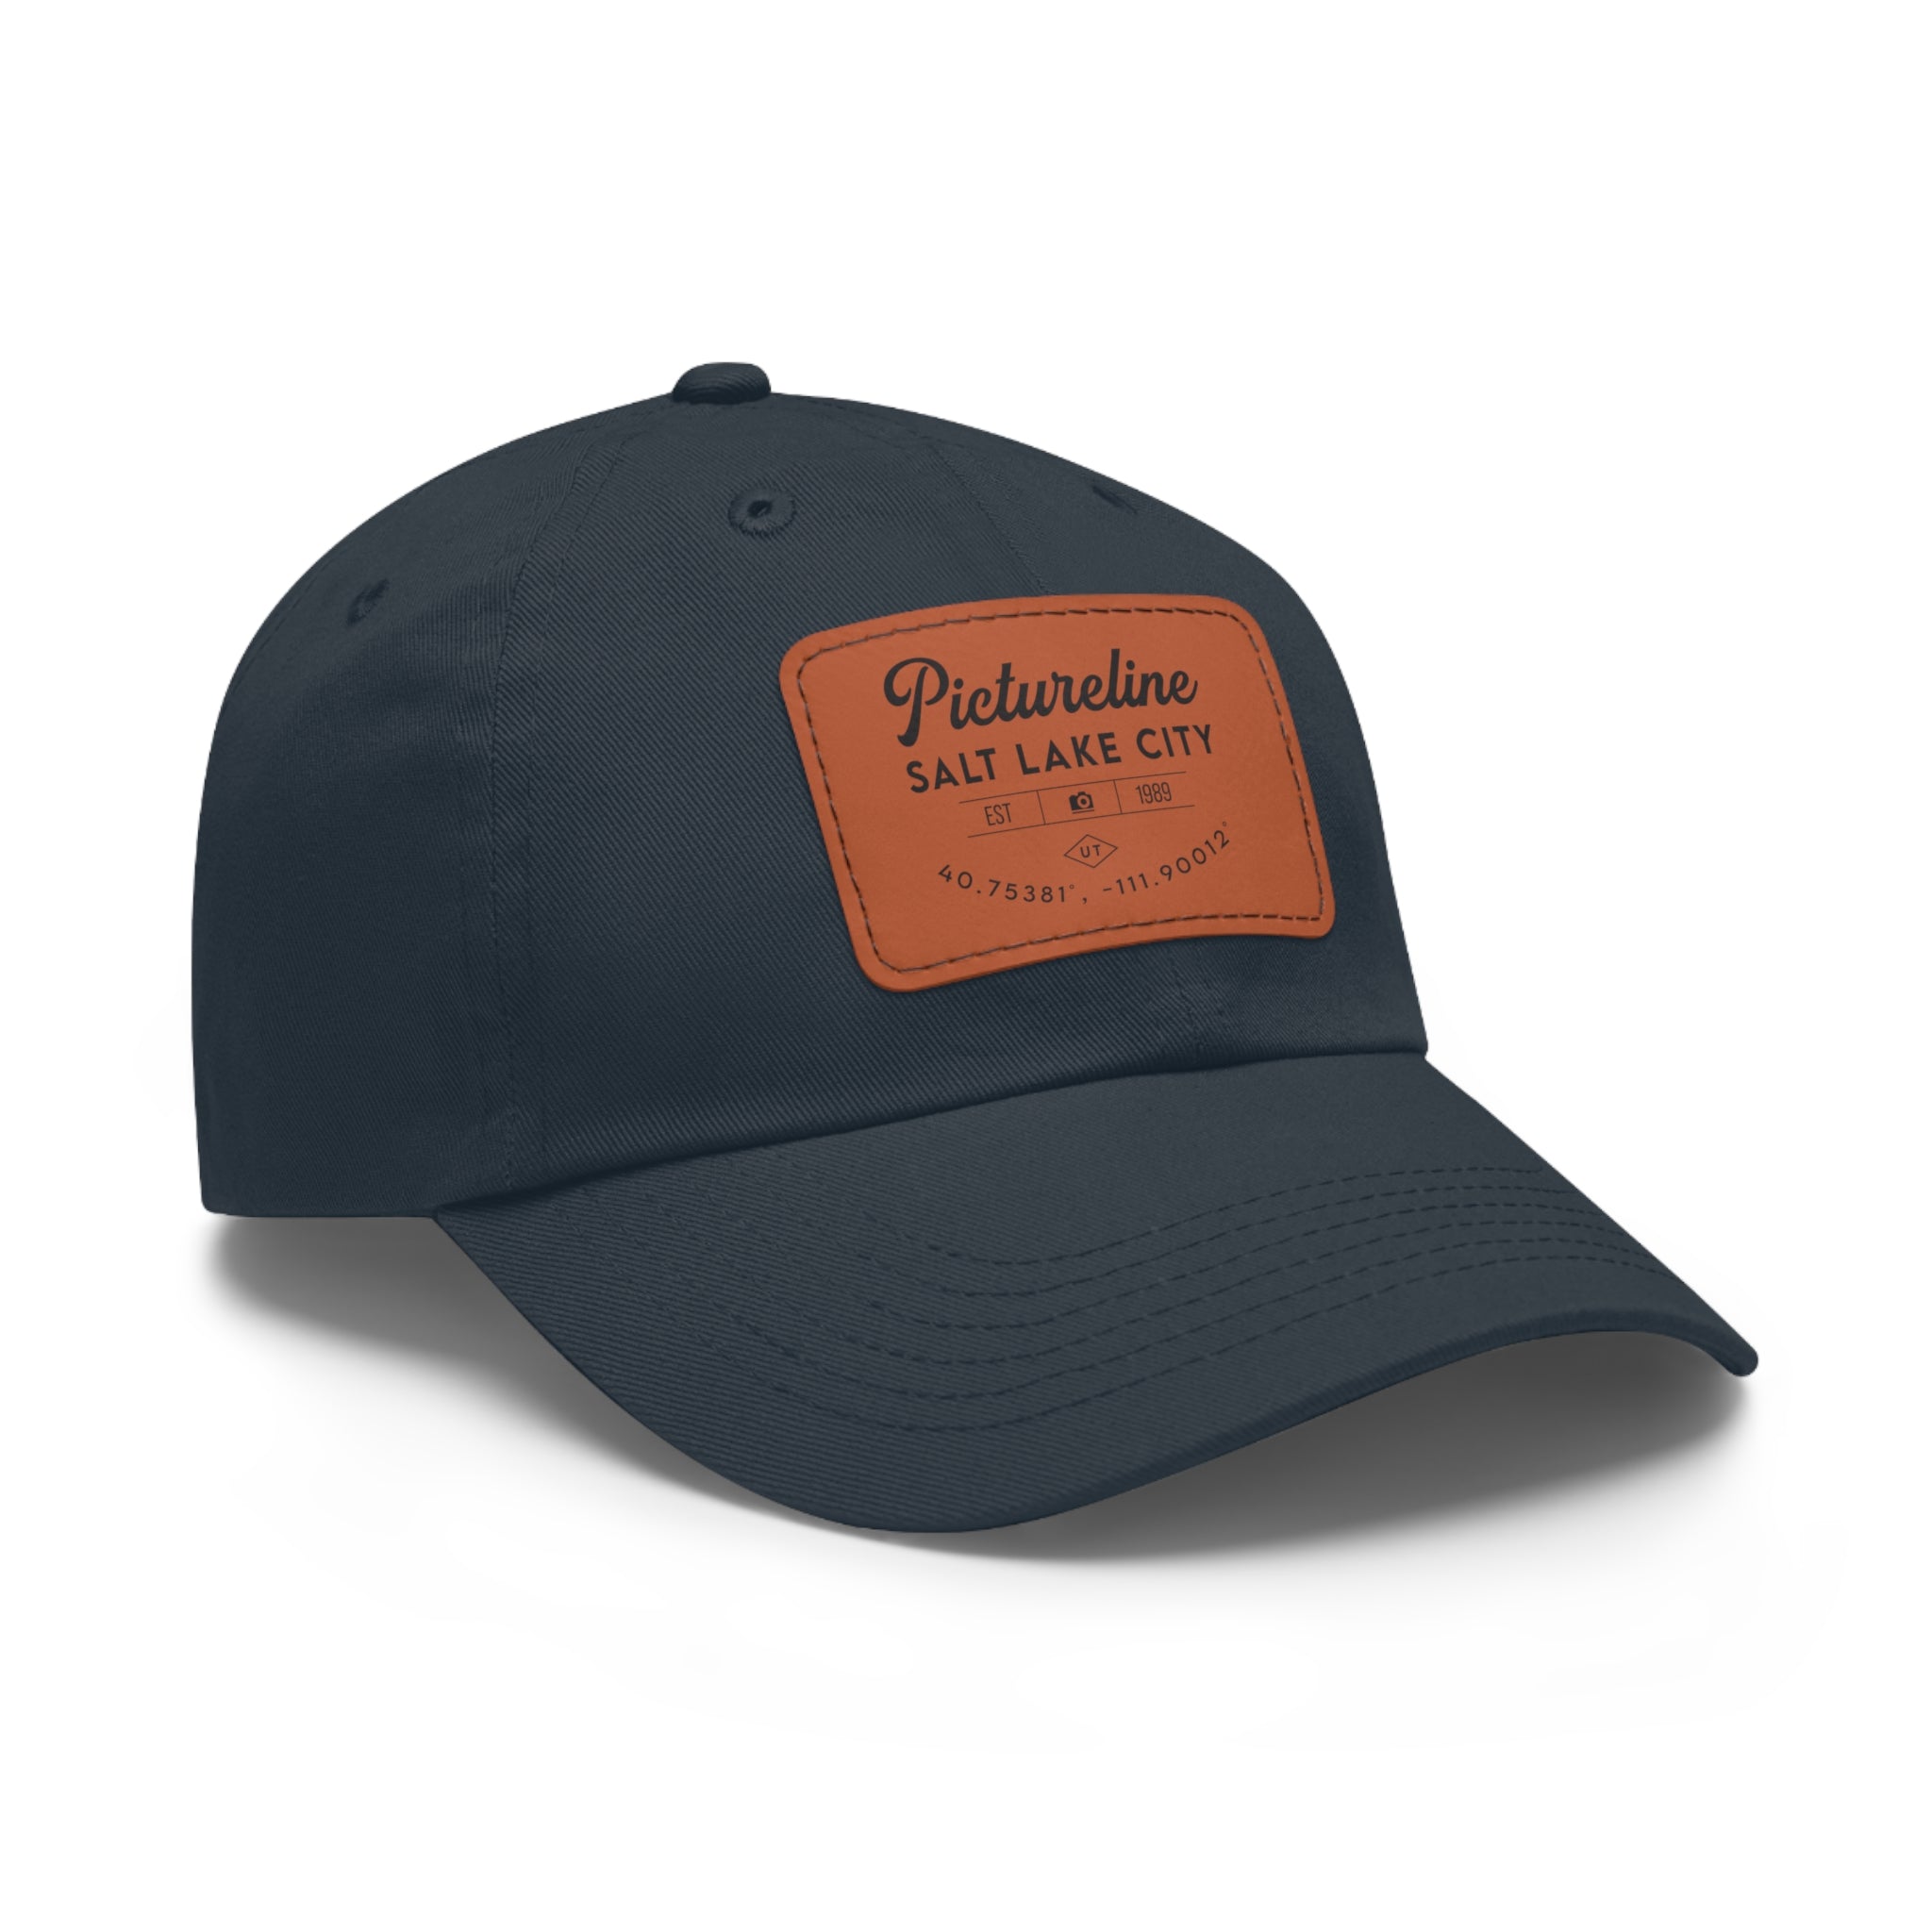 Old School Pictureline Hat with Leather Patch